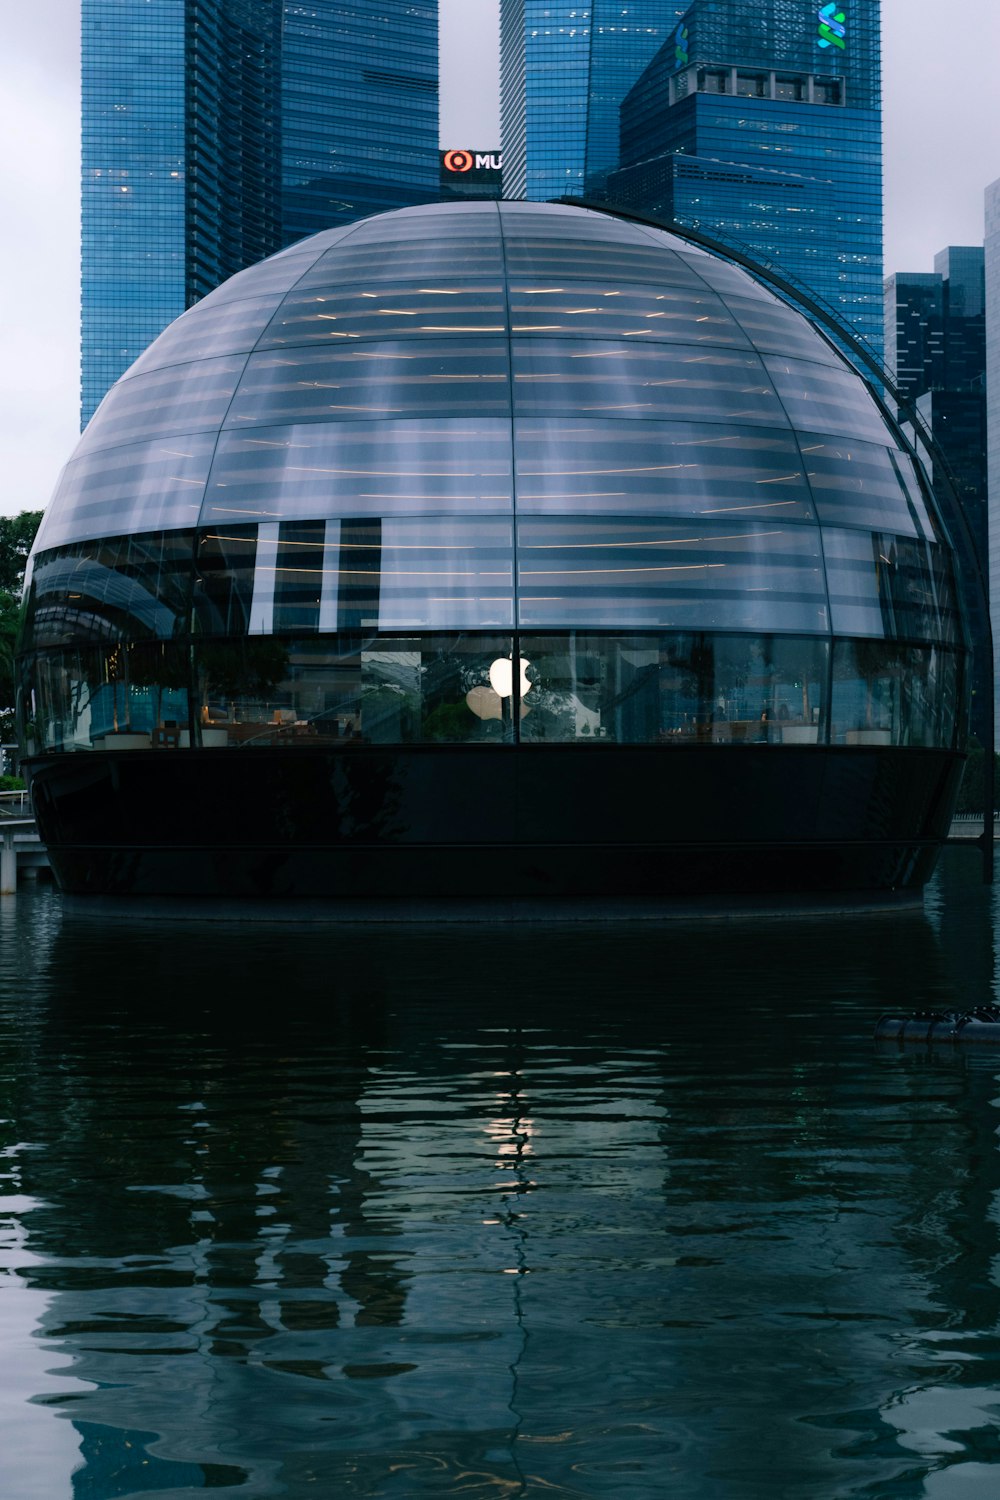 a large glass dome sitting in the middle of a body of water